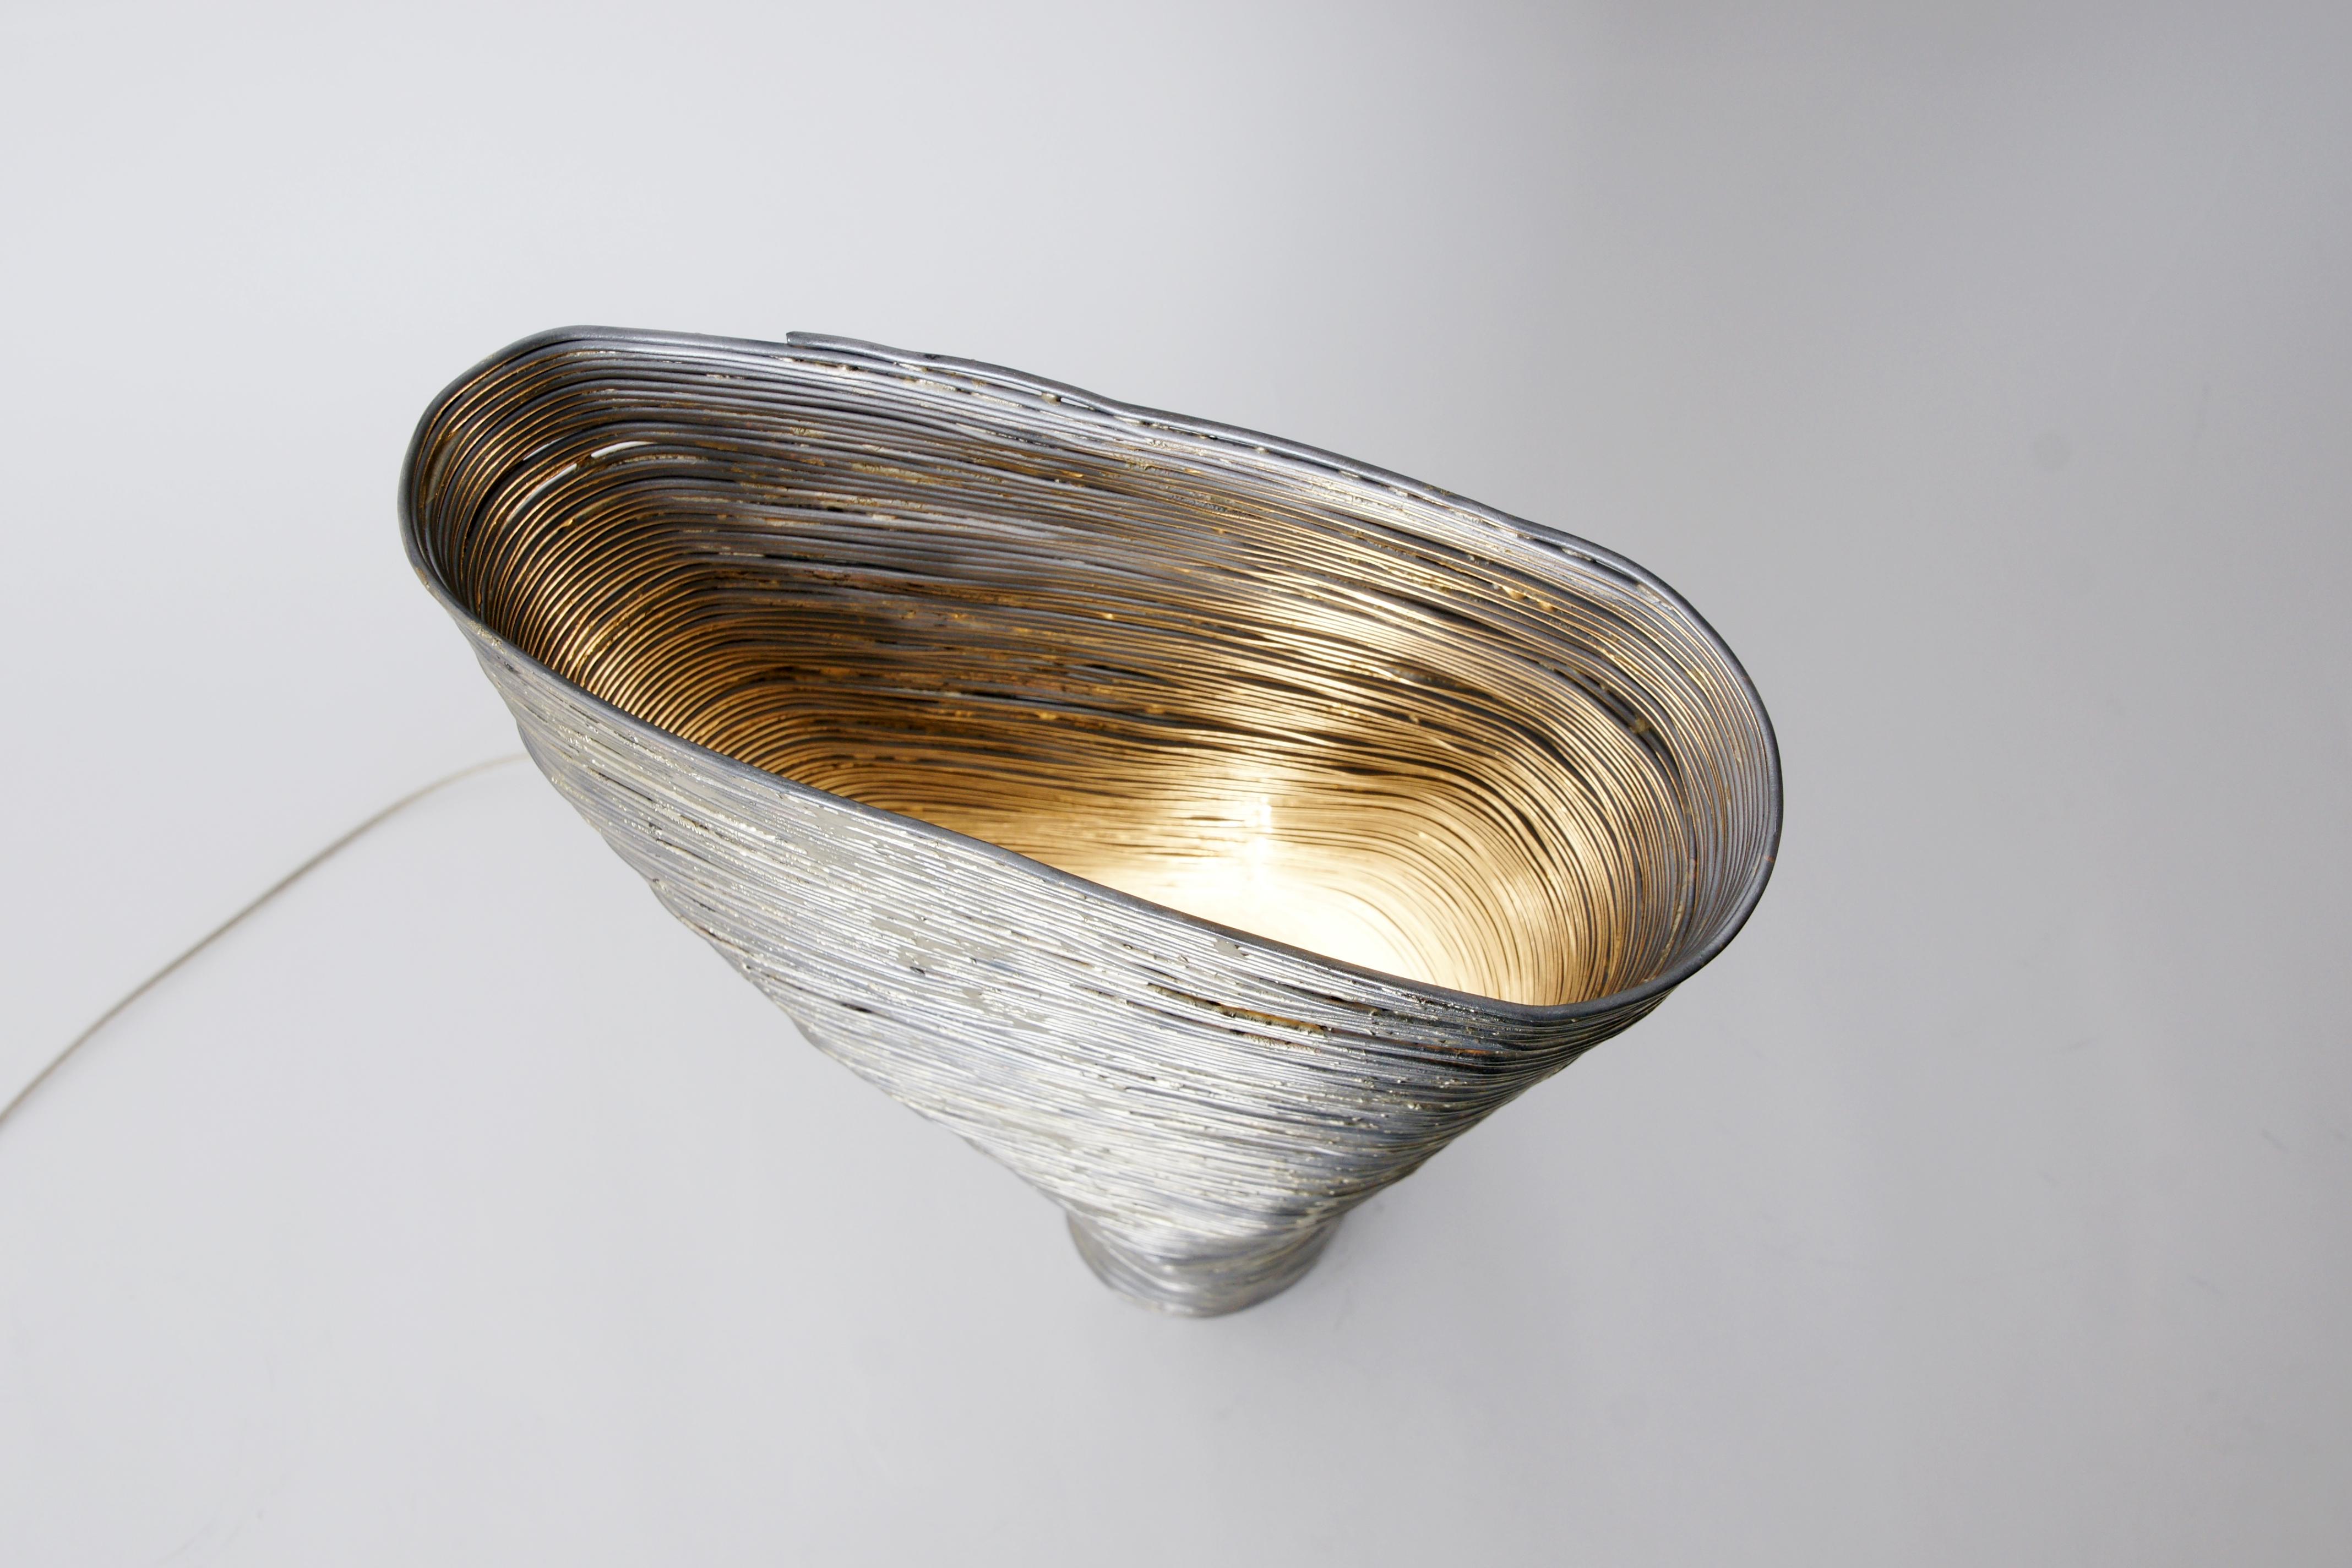 Wrap beech steel table light by Johannes Hemann
Materials: Steel wire, brass
Dimensions: height 50cm, Ø 12- 20cm

‘wrap, the series of objects by German designer Johannes Hemann examines the shells of things remaining after their disappearance.